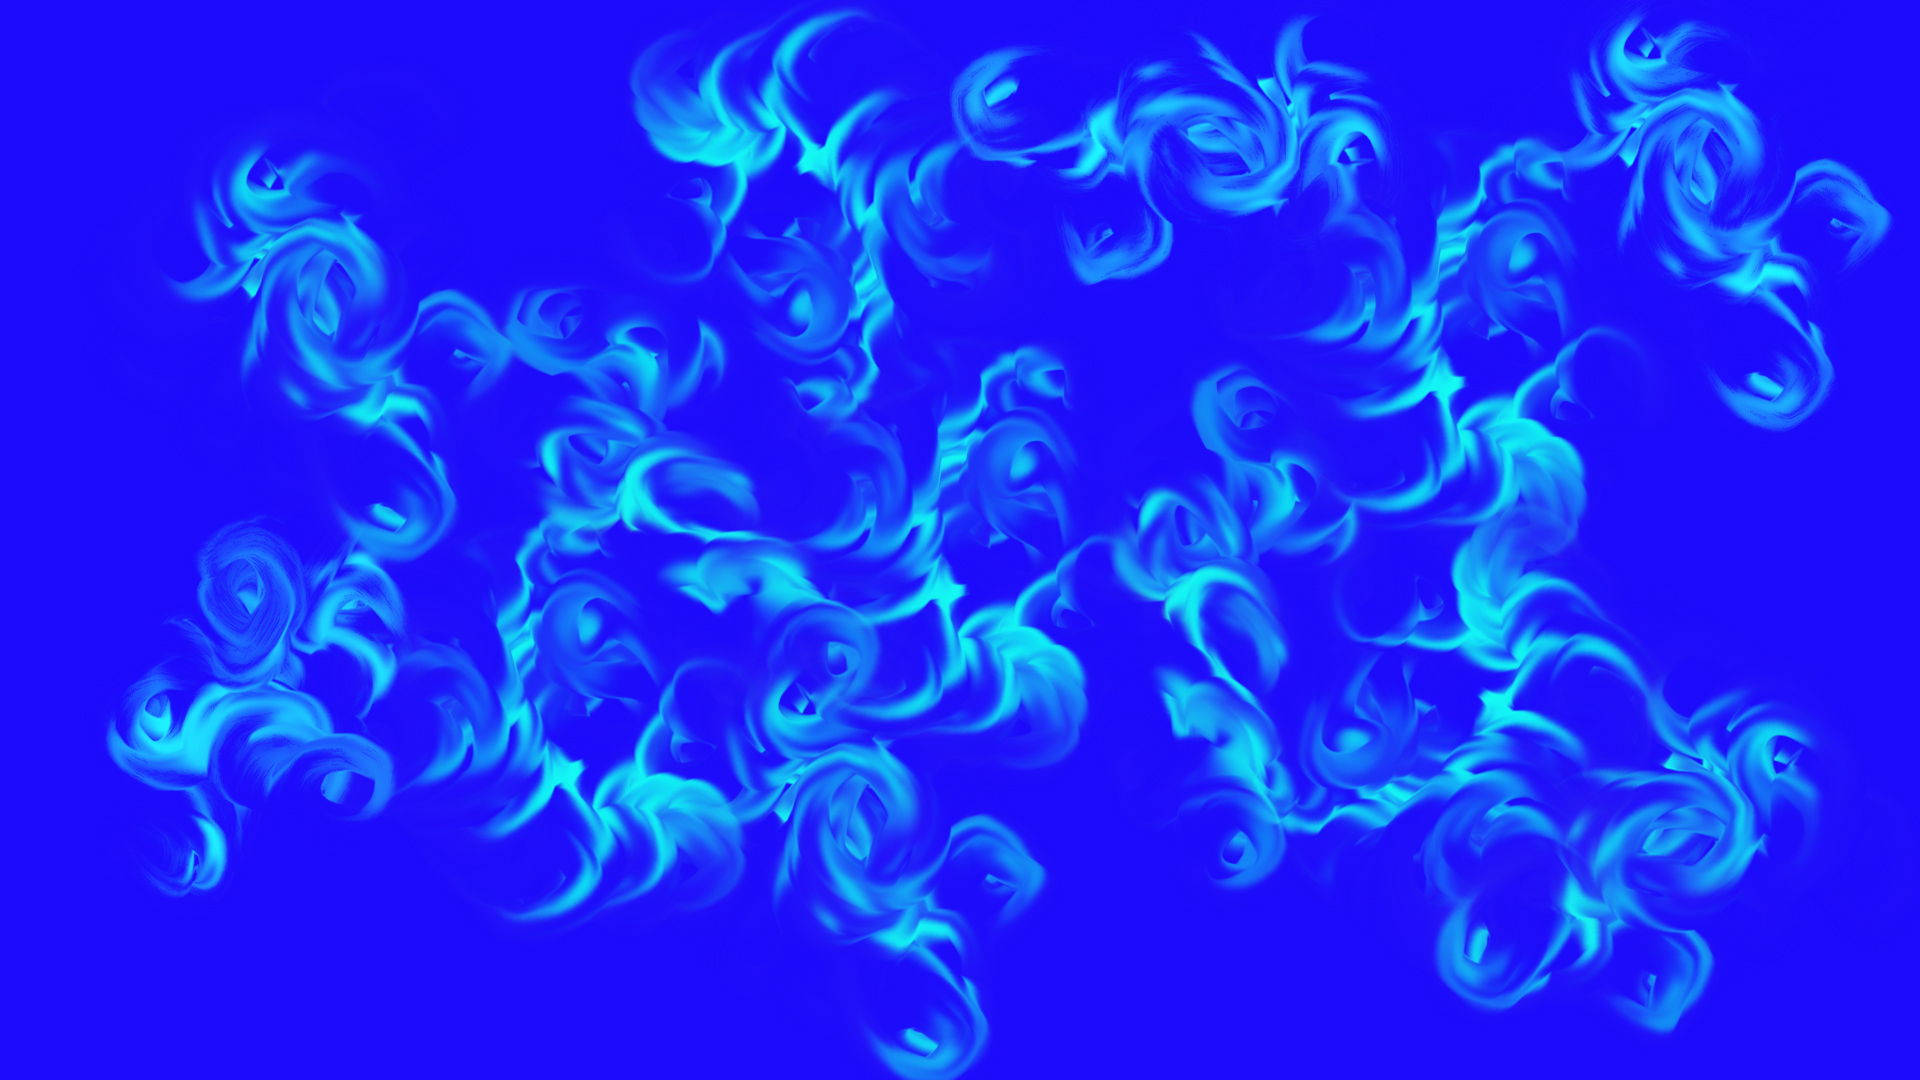 abstract, cool, blue, distortion, smoke wallpaper for mobile